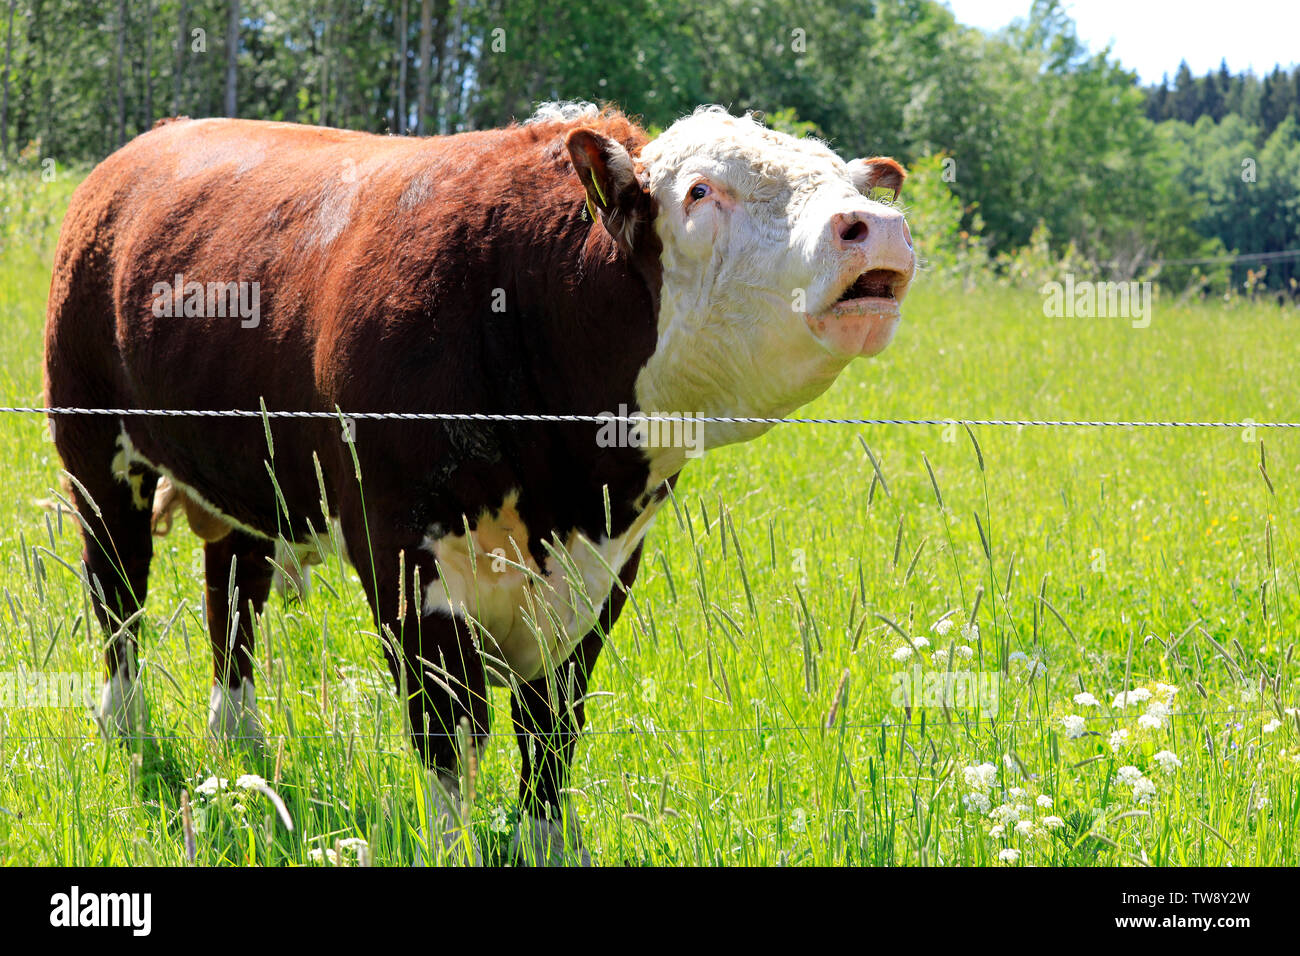 Upset and angry Hereford bull bellowing in his pen on a sunny day of summer. Stock Photo